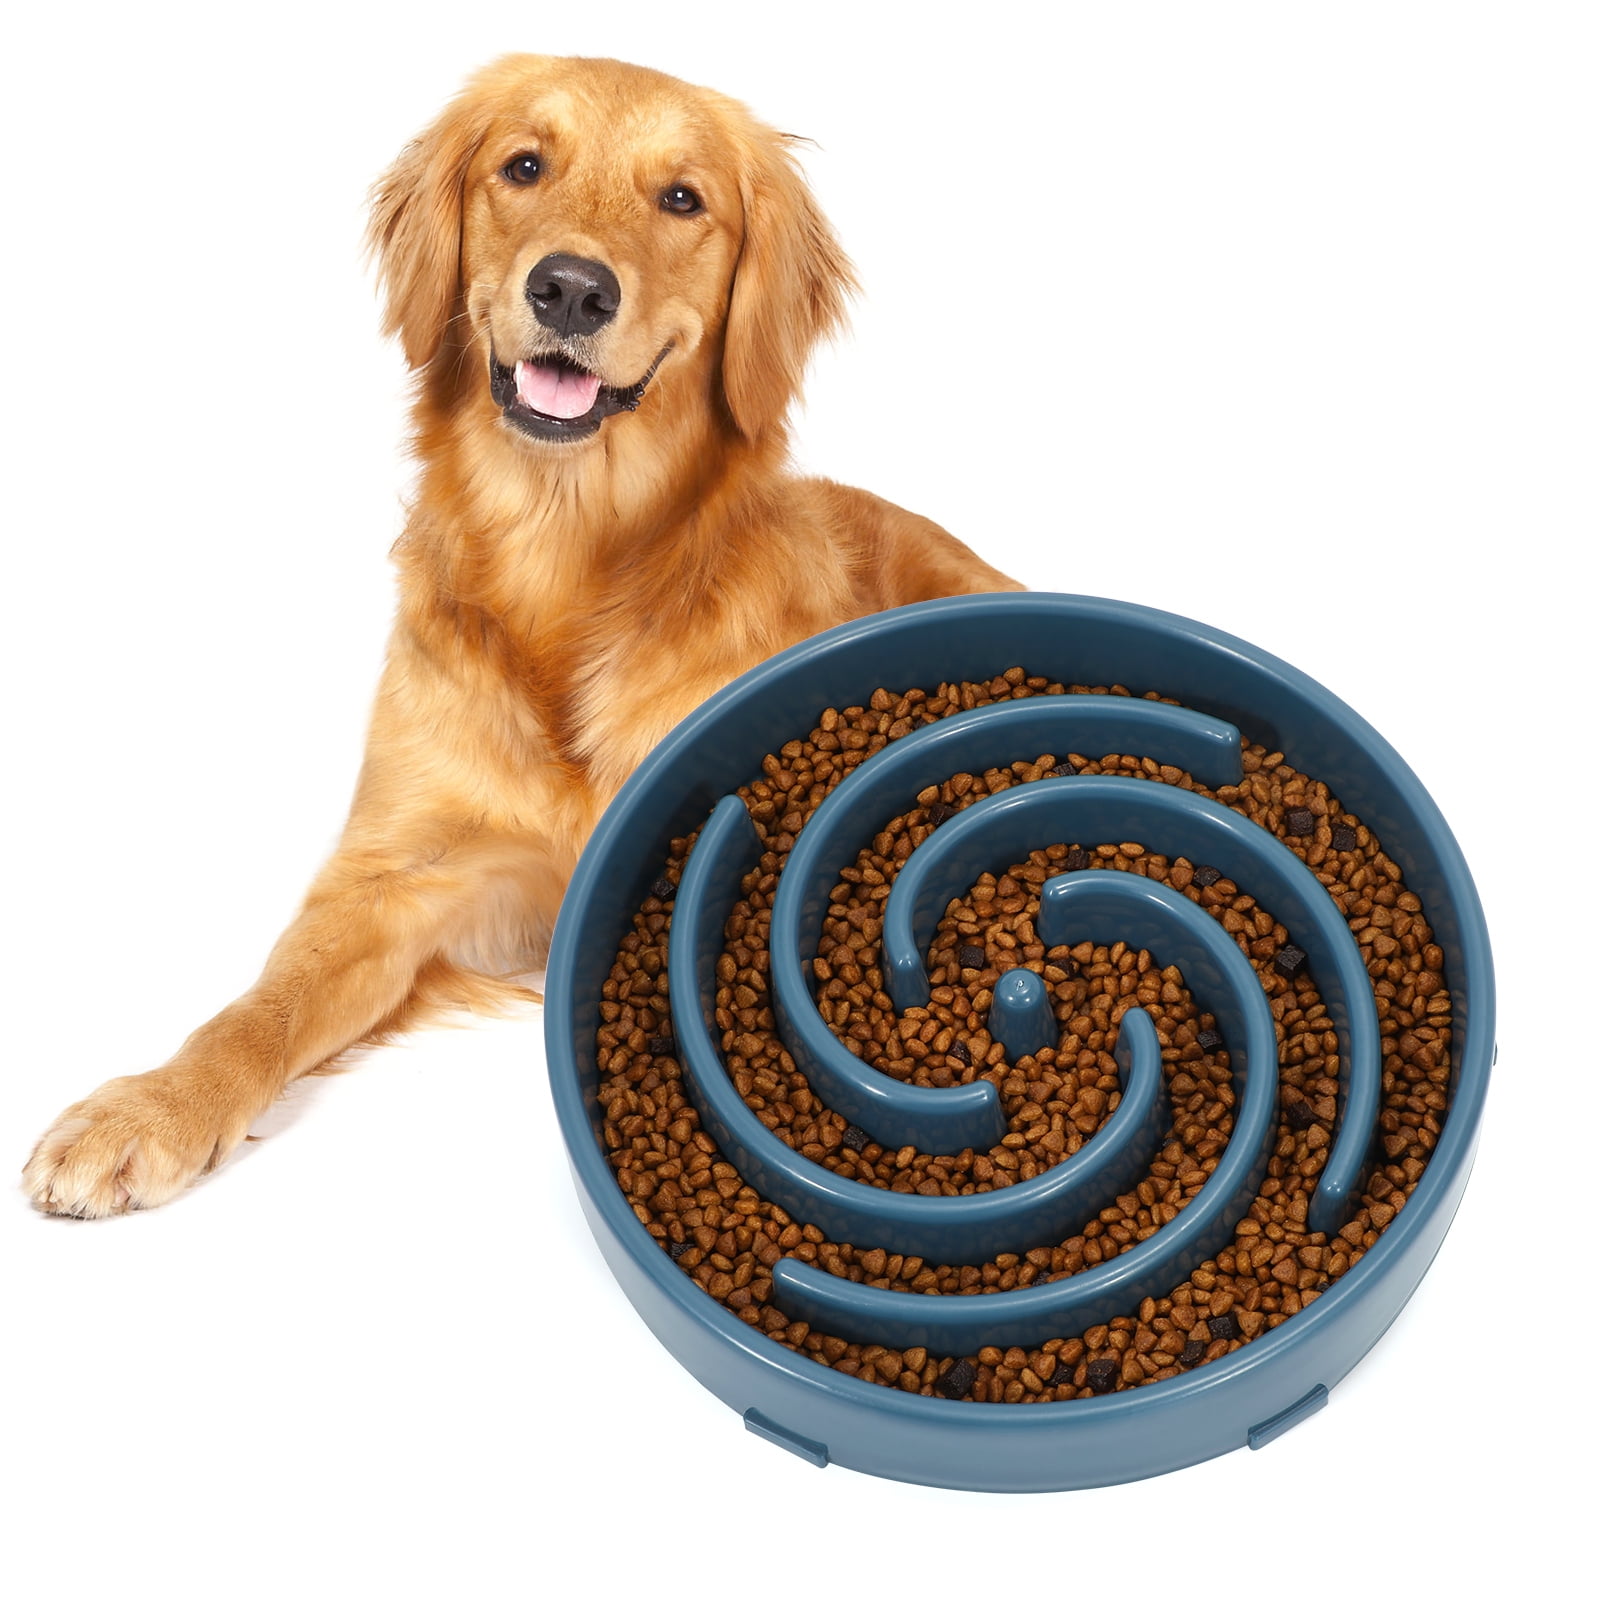 WHIPPY Slow Feeder Dog Bowl, Pet Food Feeding Bowl, Preventing Choking  Bloat Dogs Bowl for Small Medium Large Dogs 